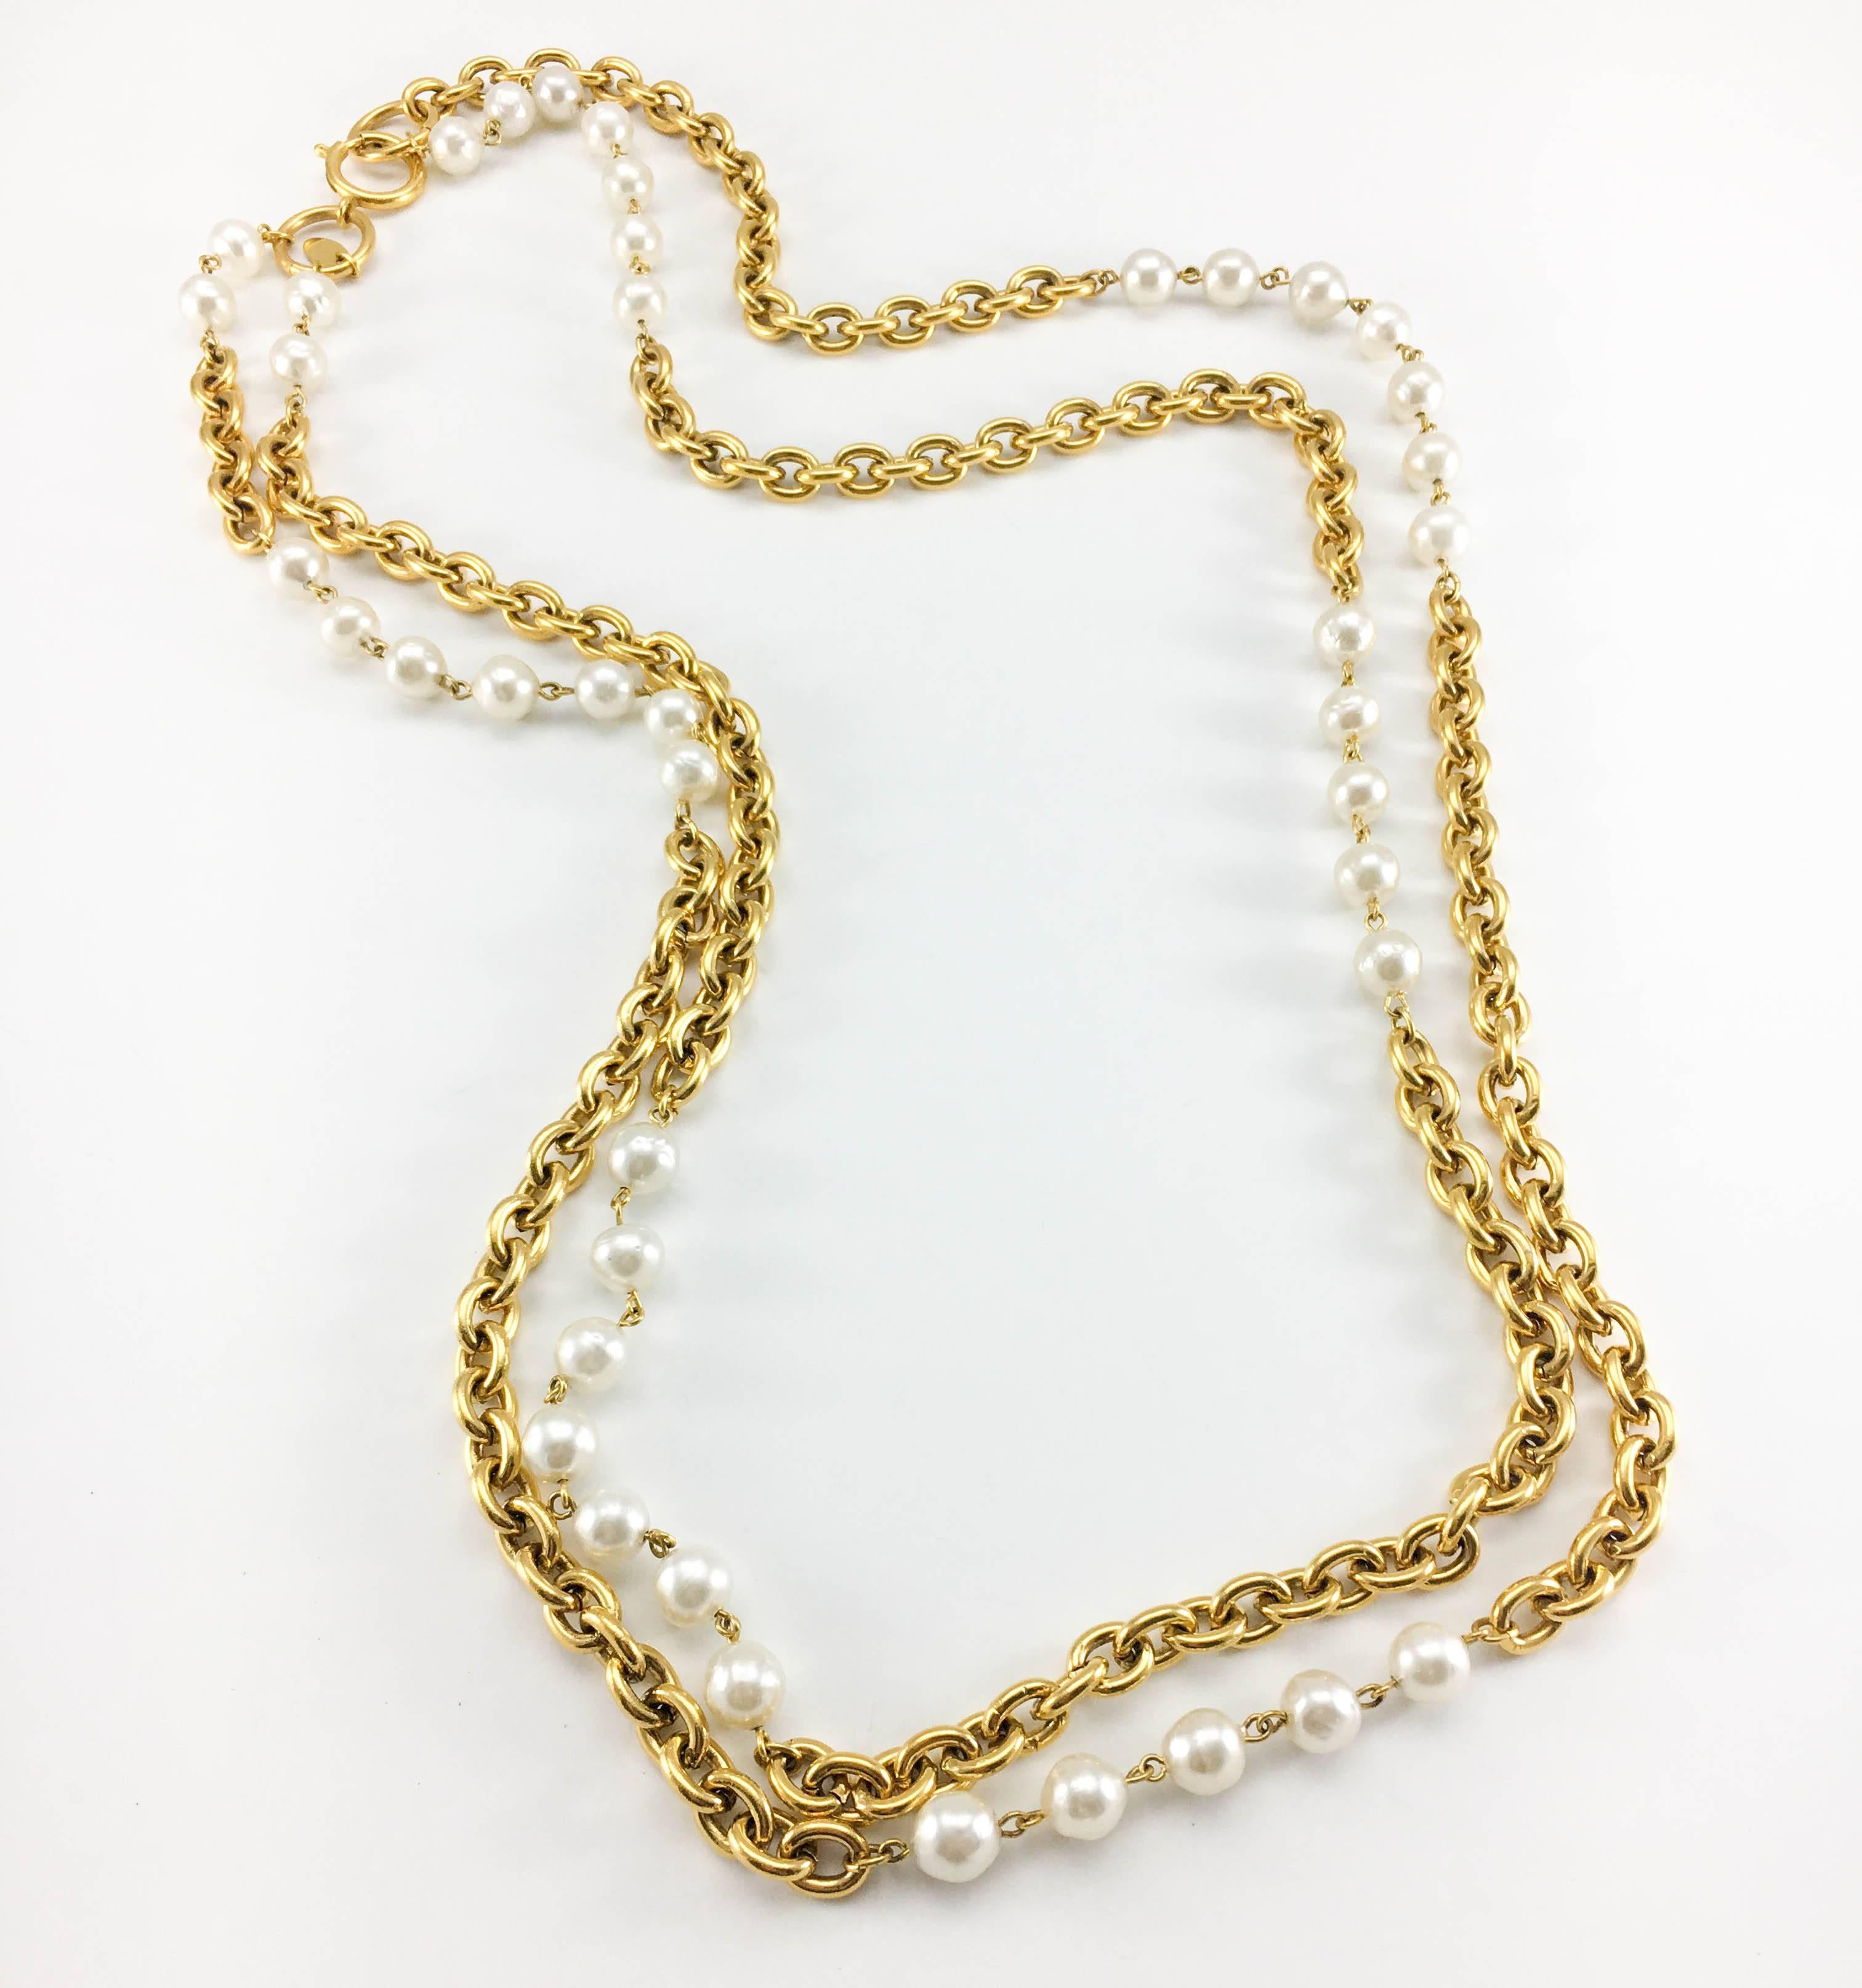 Women's Chanel Double-Strand Gilt Chain and Pearl Sautoir Necklace, 1984 